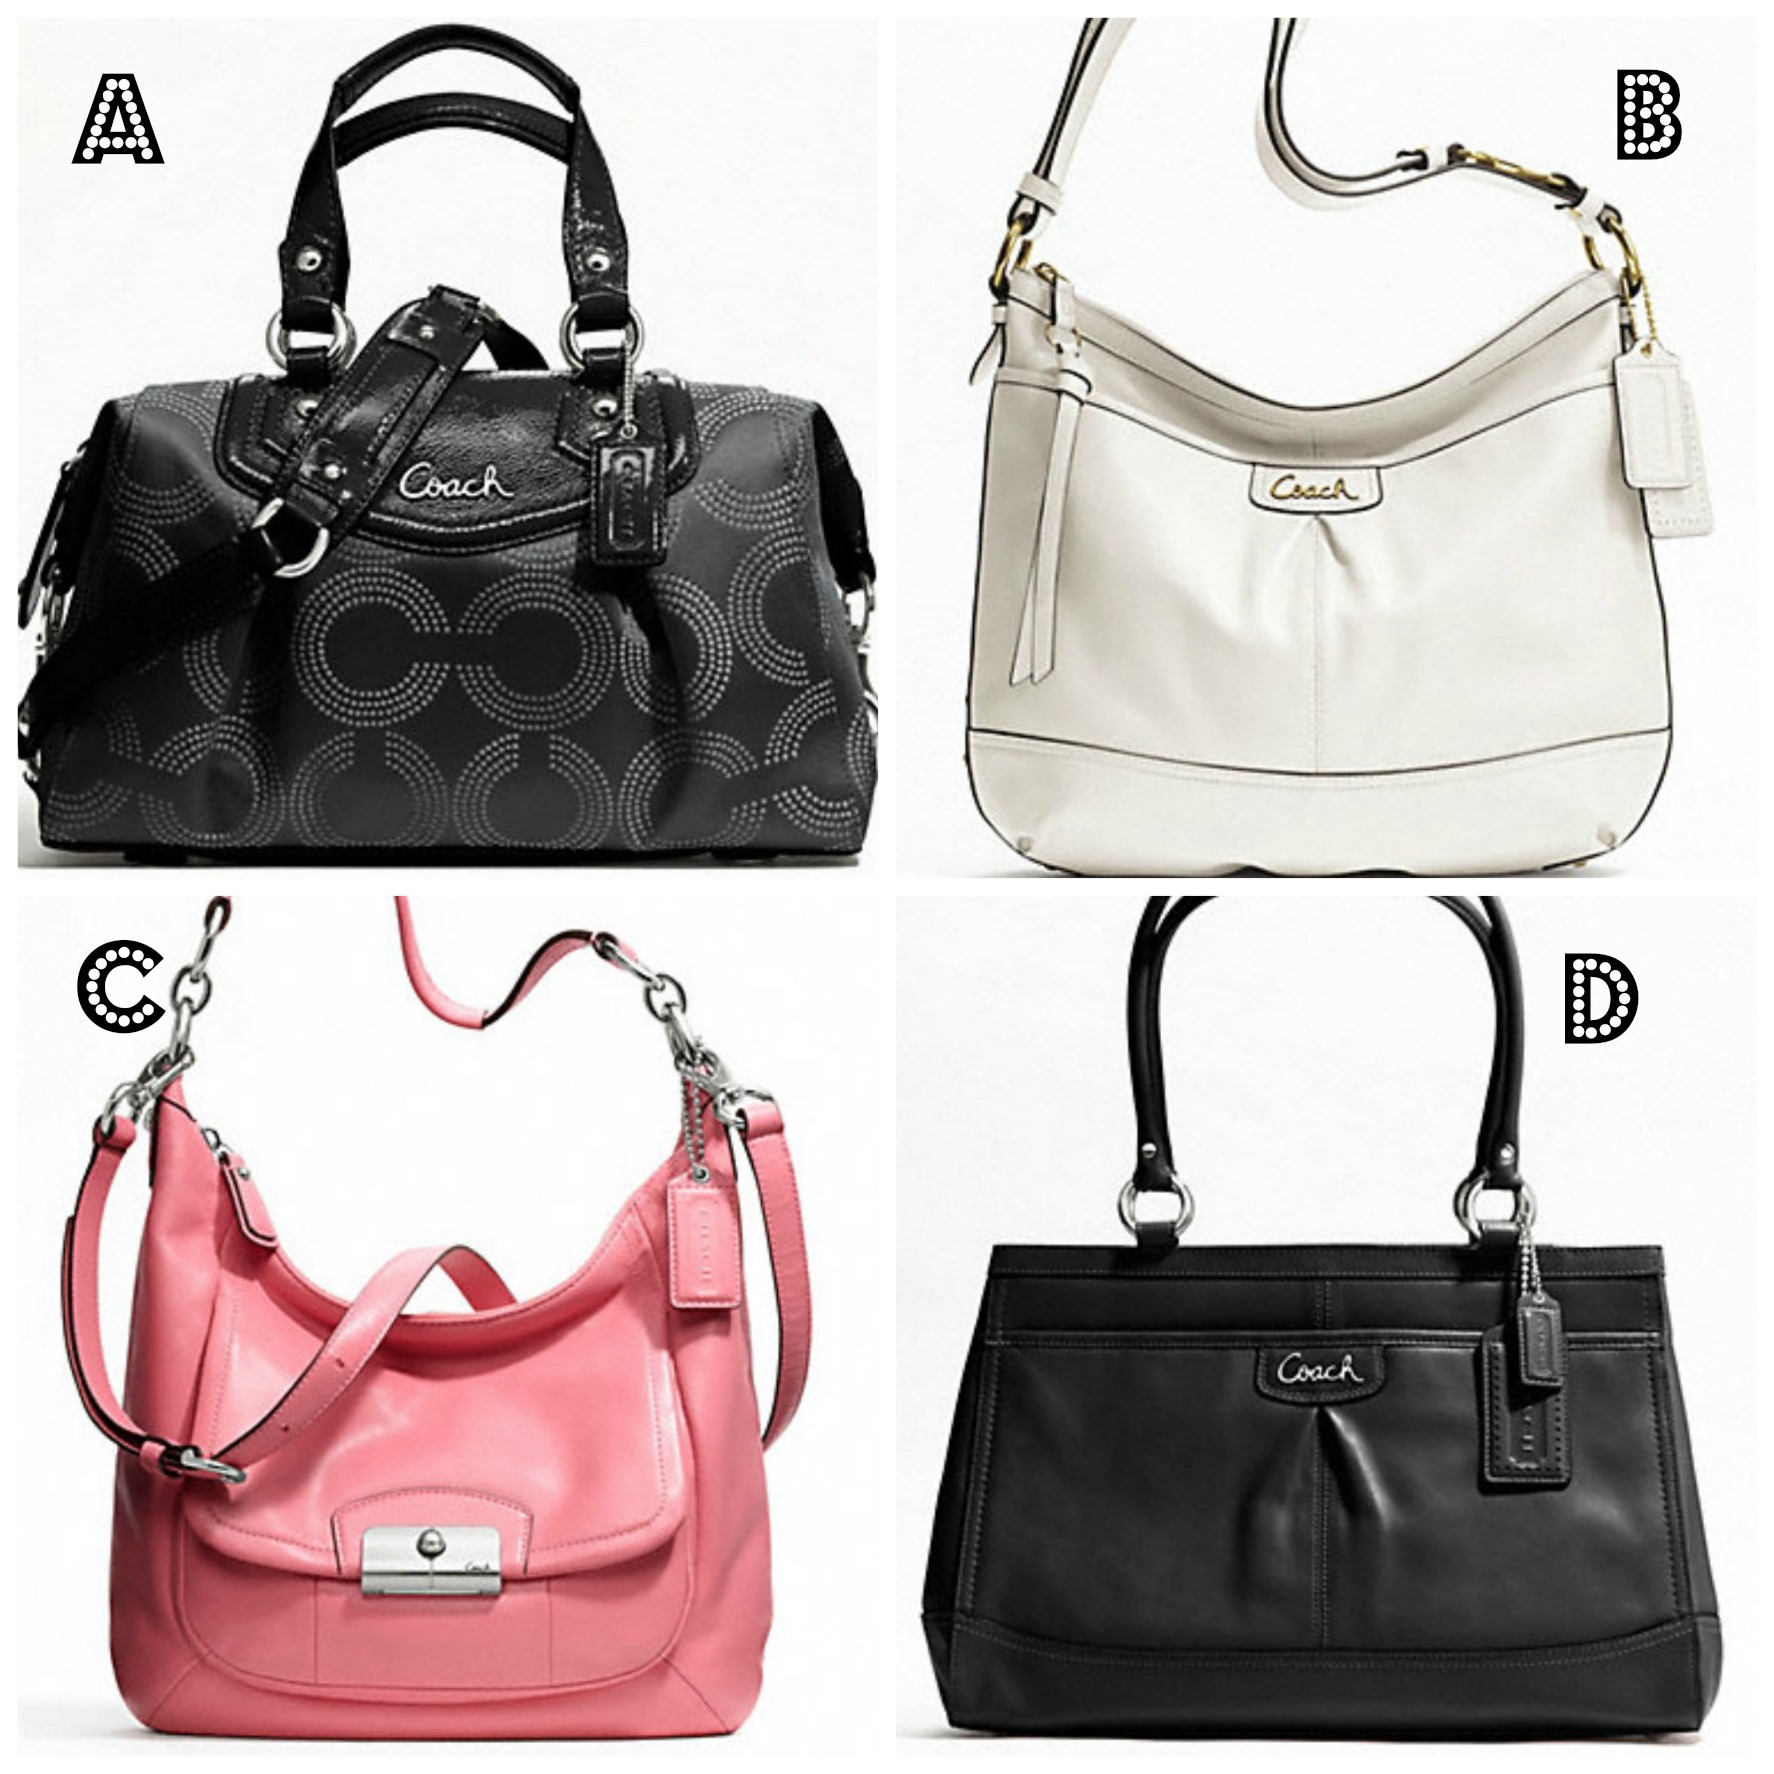 Win one of TWO Gorgeous Coach Handbags! YOUR CHOICE! - Wheel N Deal Mama